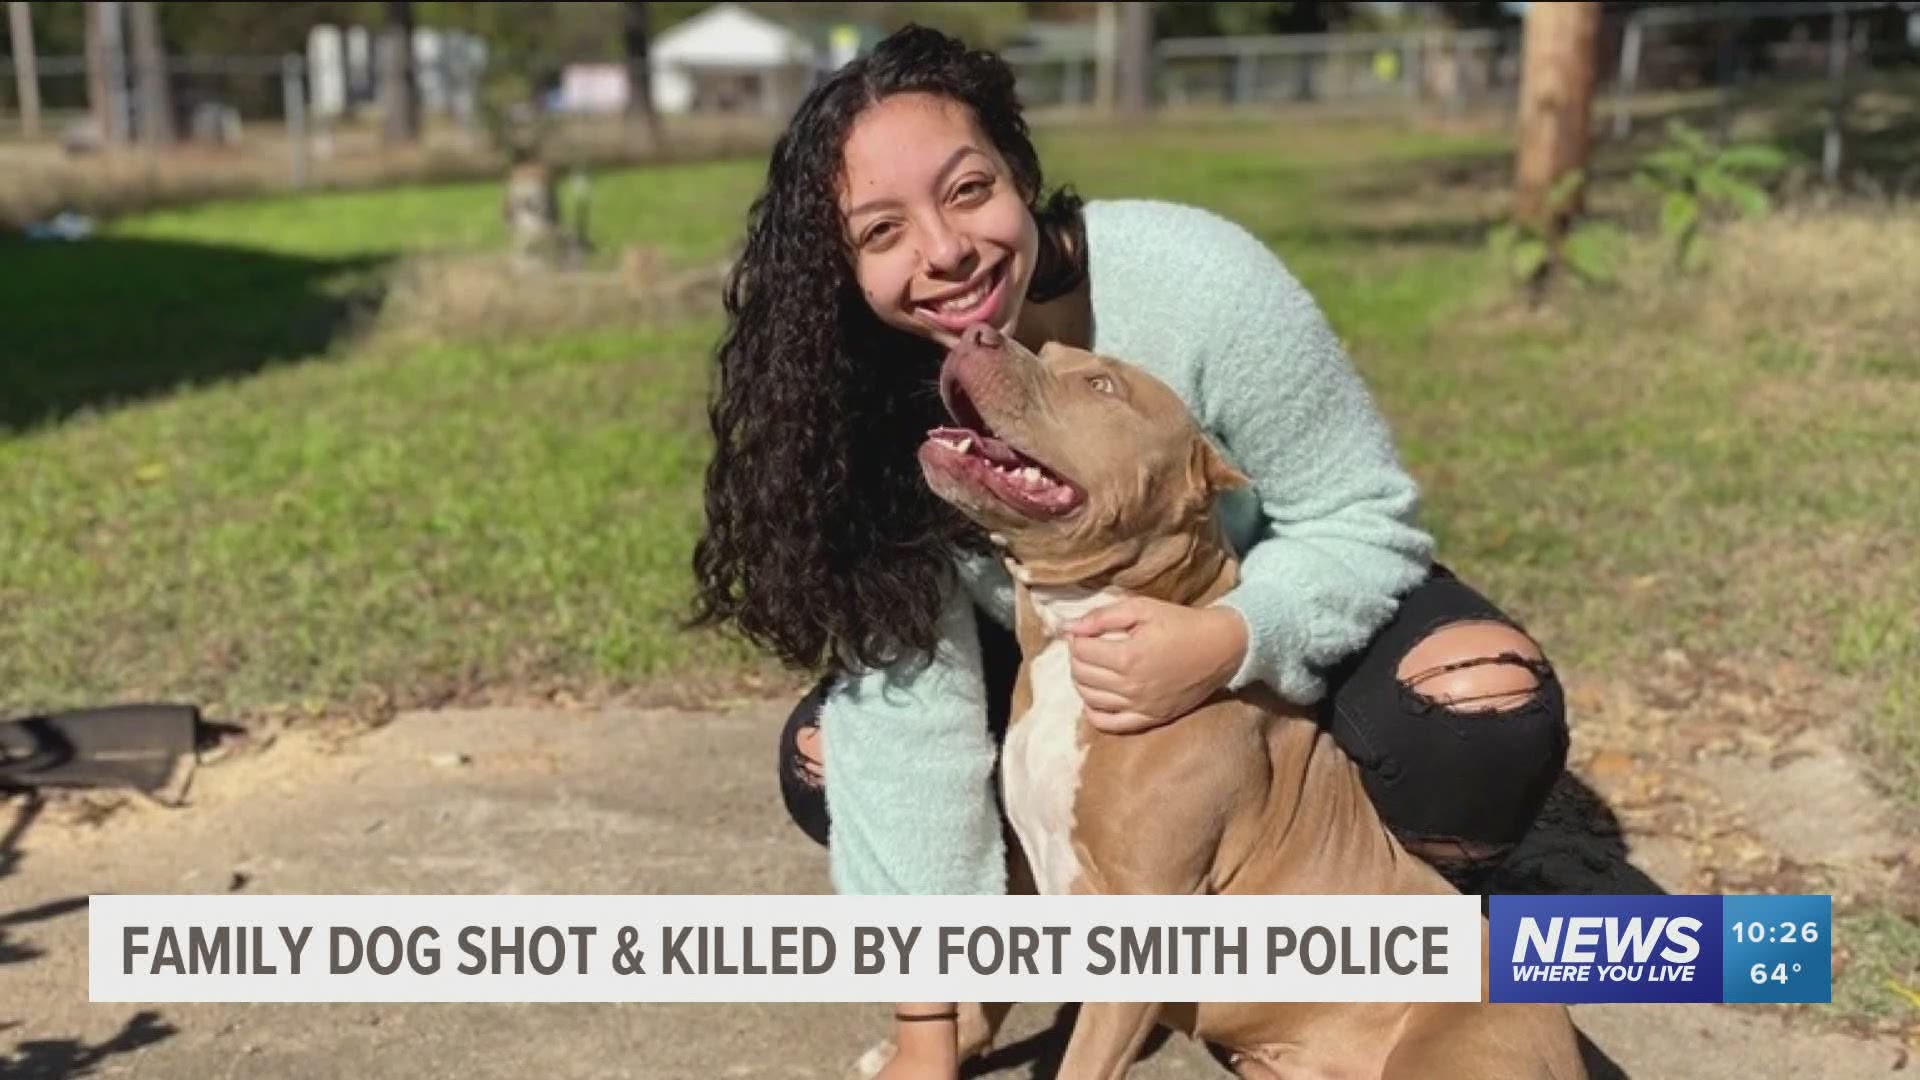 Fort Smith Police were in a backyard when three-year-old dog Echo was shot by police. https://bit.ly/34iPFYM